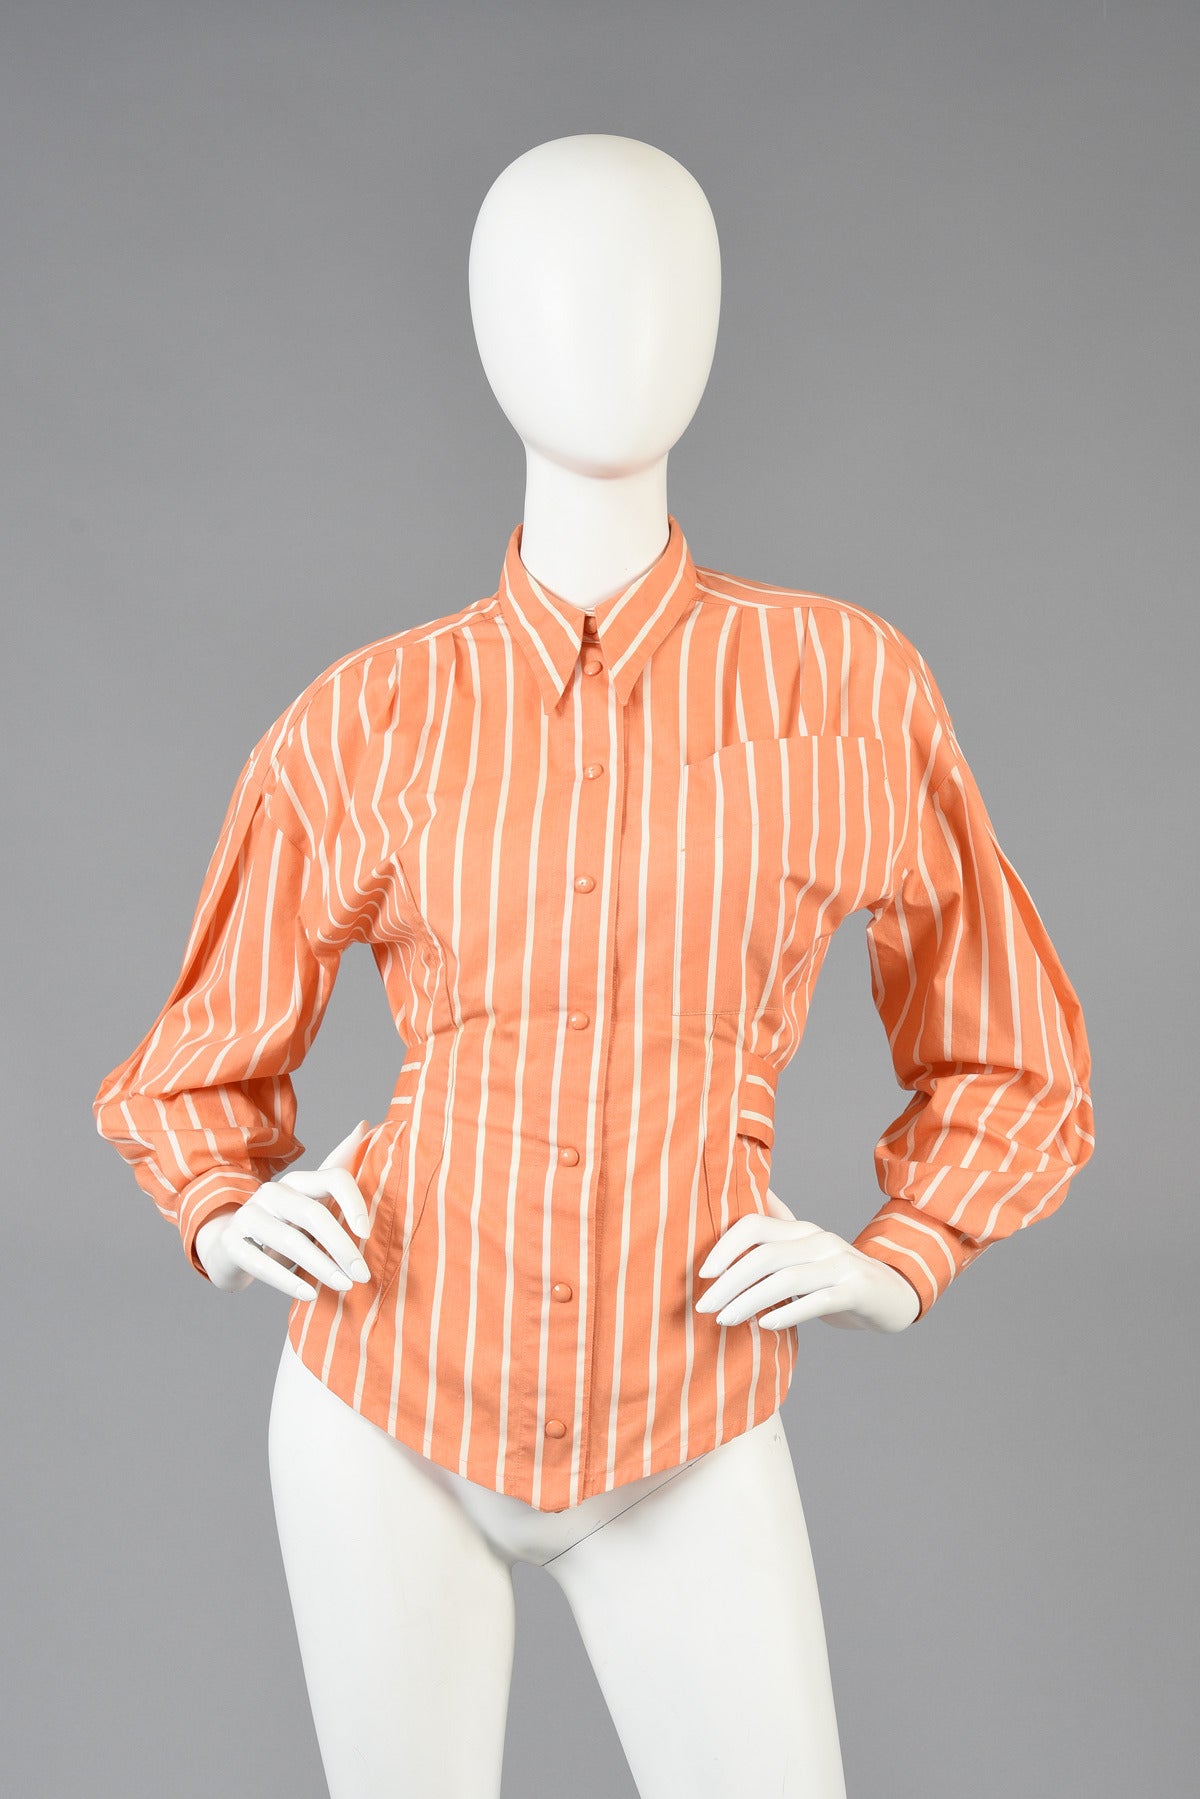 Super great 1980's cotton blouse by Thierry Mugler. Such a great find! Sherbet colored cotton with white pinstripes makes this such a feel good little piece! Snapping front with huge pocket, cutout back and attached belt. The perfect piece for